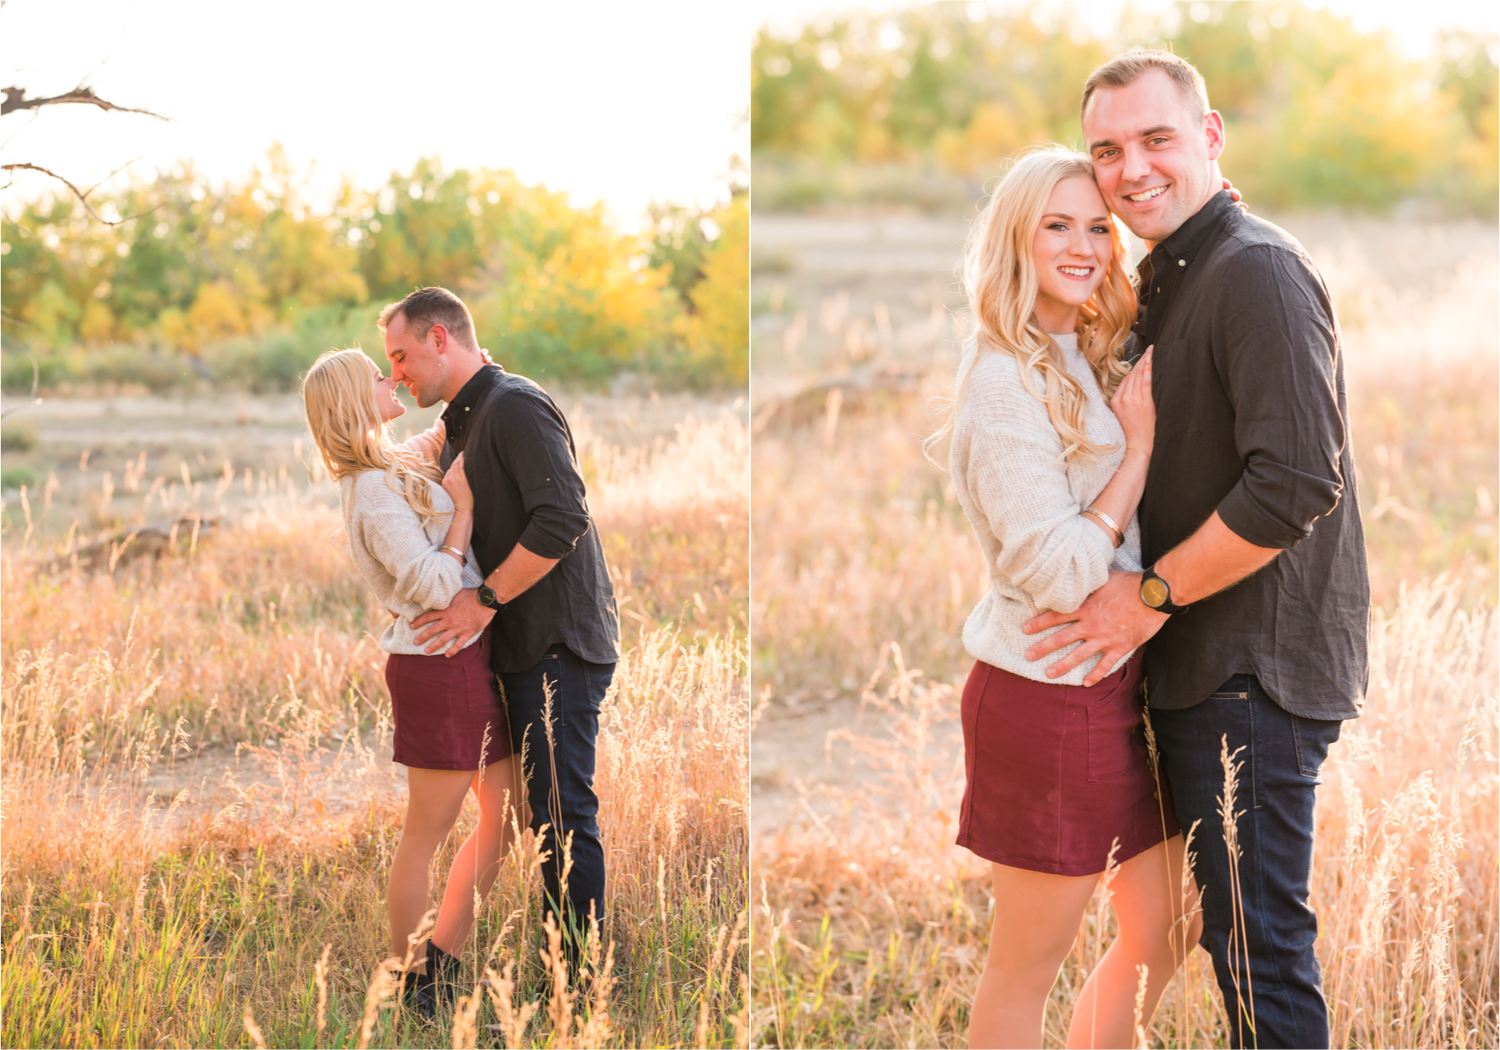 Romantic Fall Farmhouse Engagement at Jessup Farm | Britni Girard Photography | Colorado Wedding Photographer and Videography team | Rustic fences, fall leaves and barn doors in Fort Collins | Ring Shot